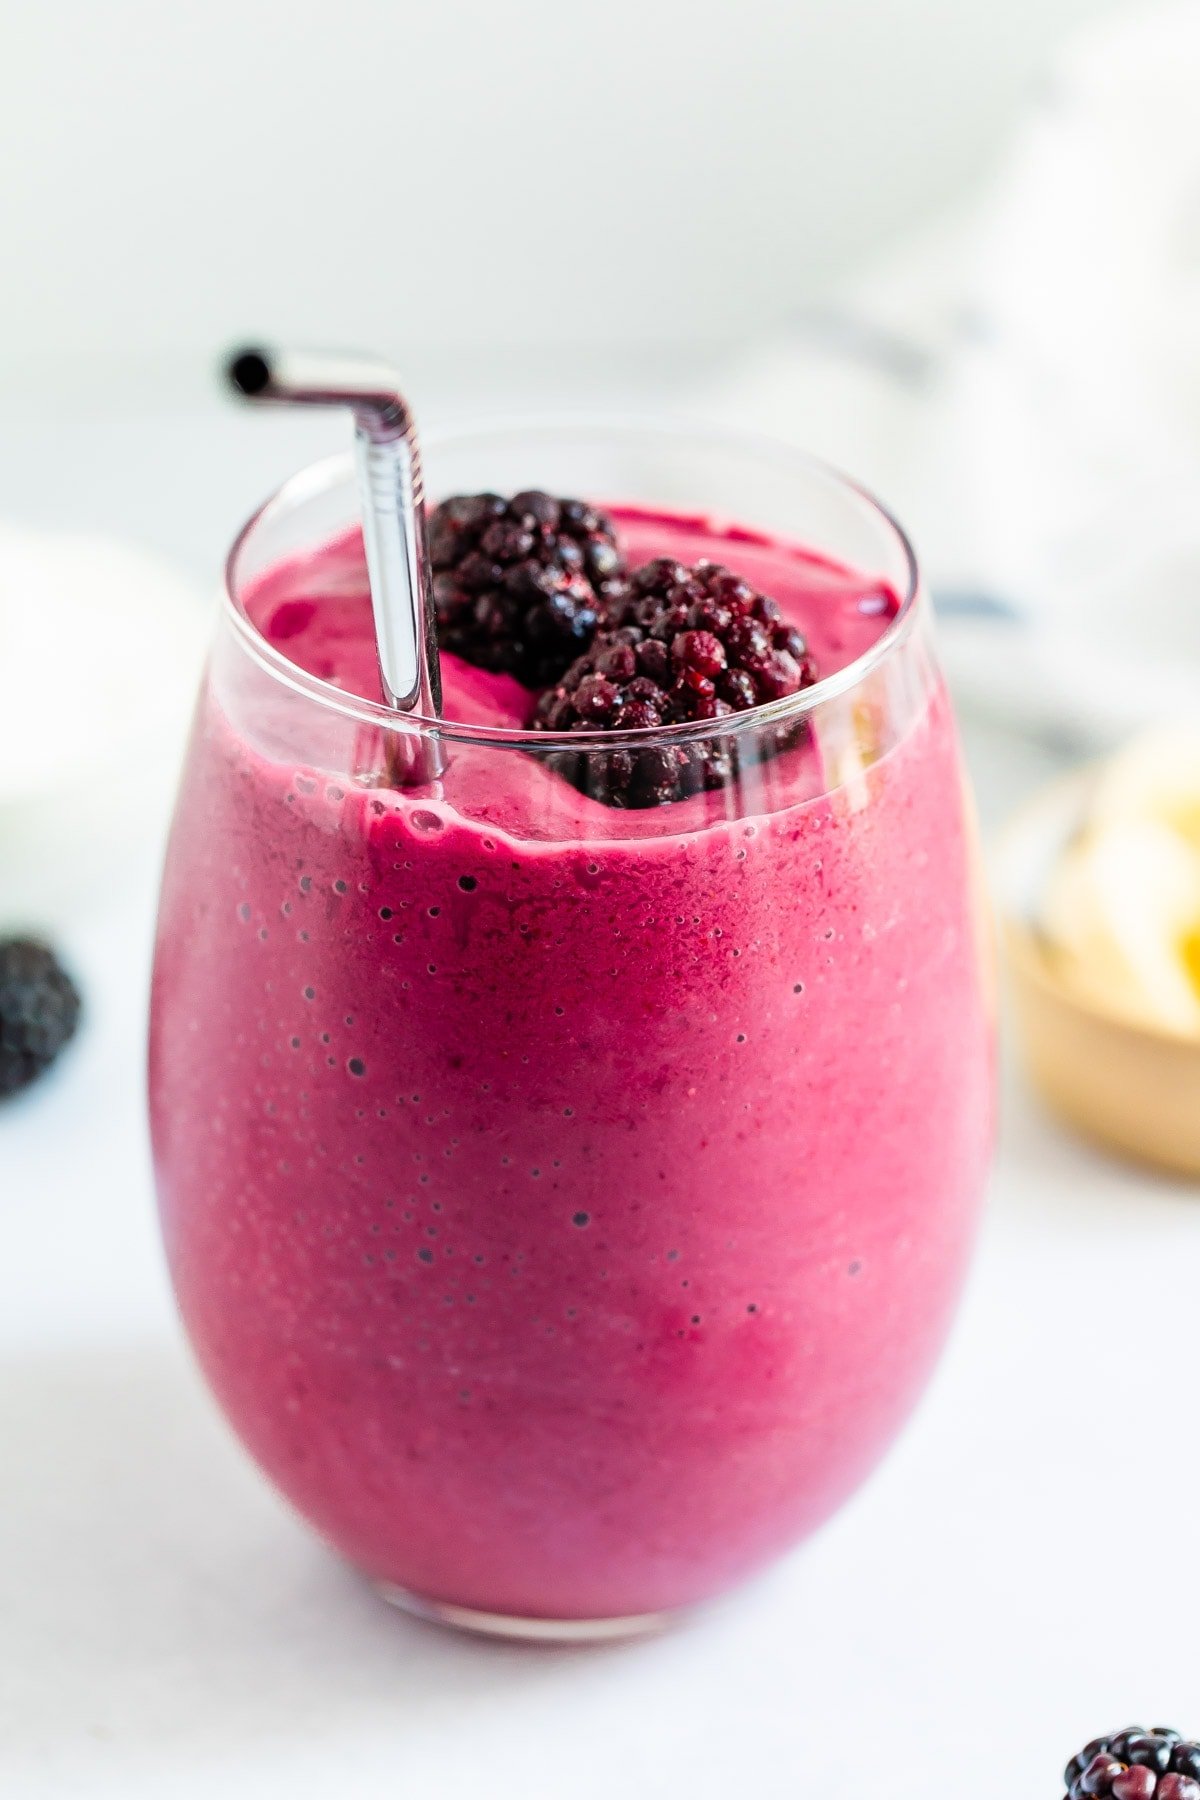 Glass of blackberry smoothie with a straw and blackberries on top.